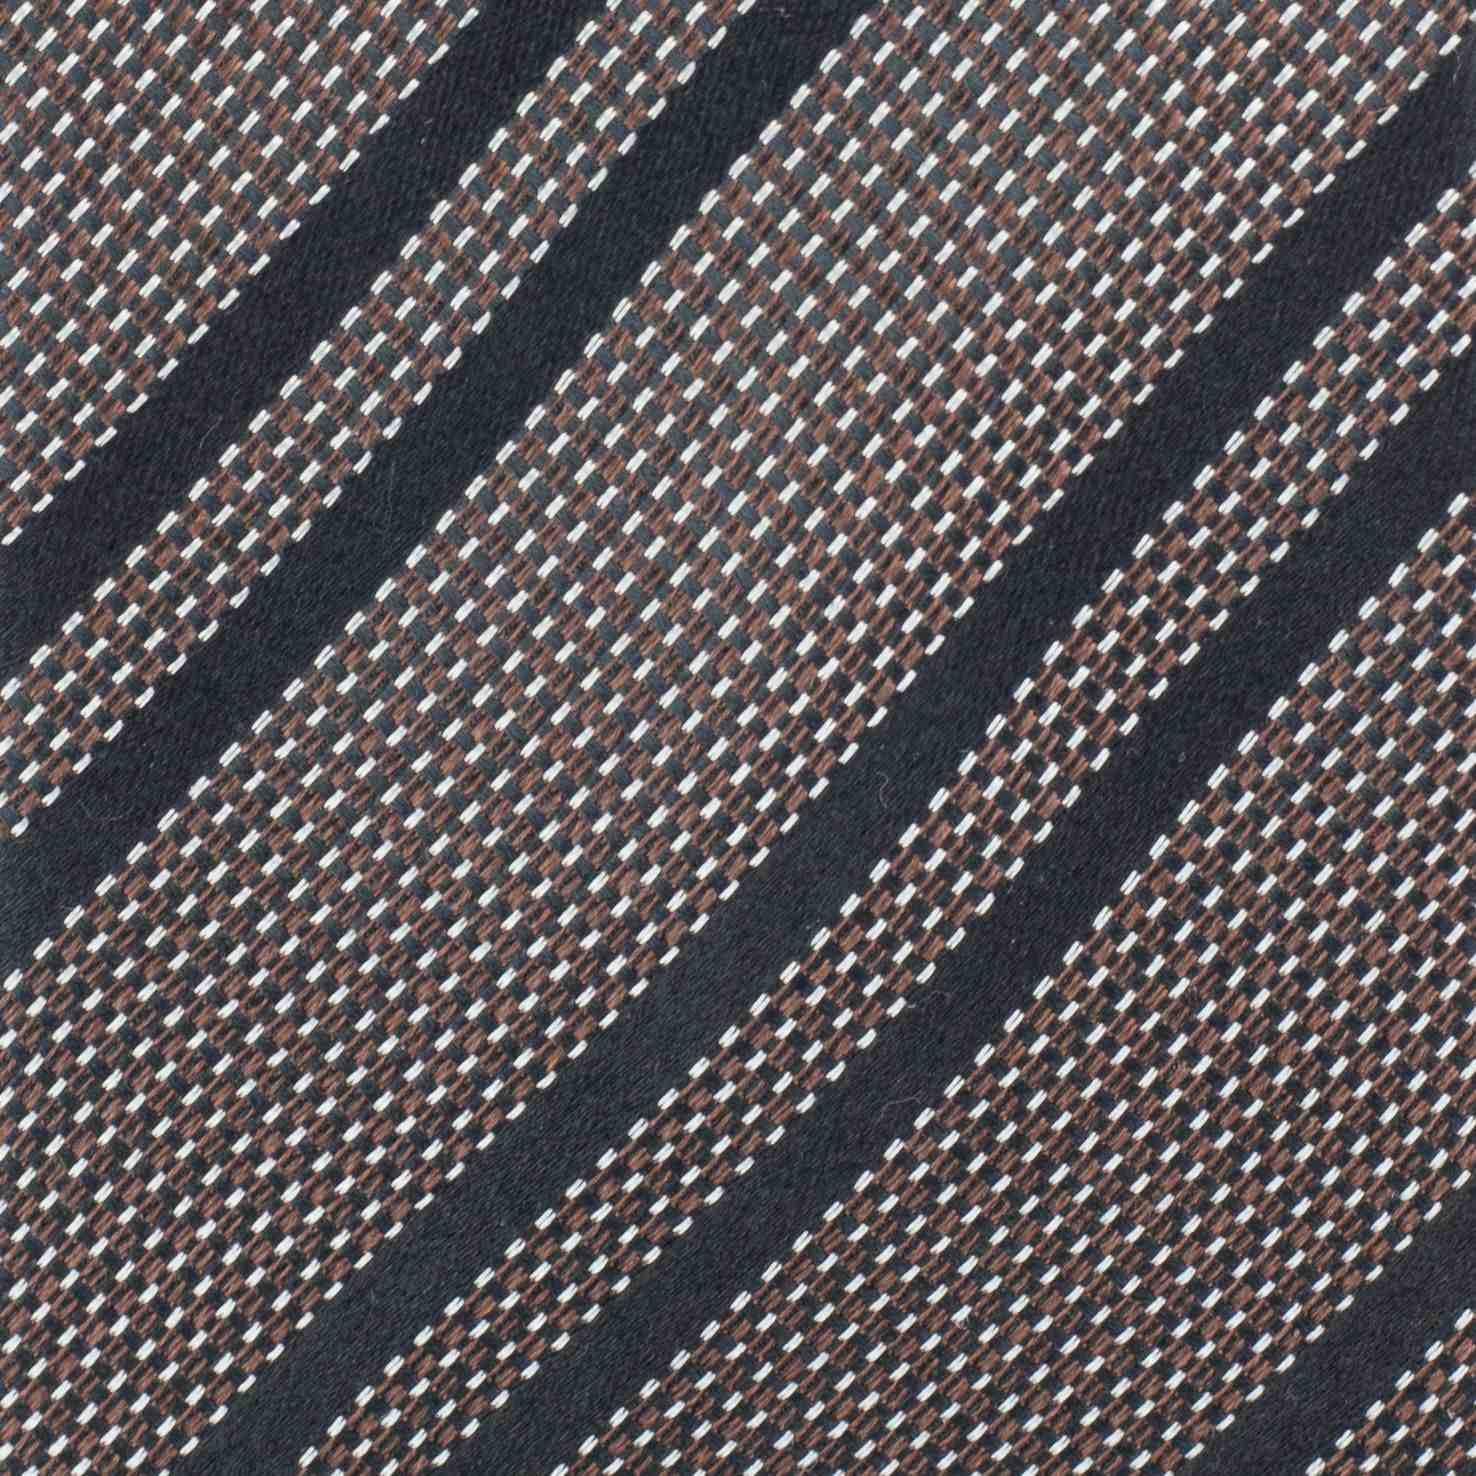 Brown and Black Striped Woven Silk Tie